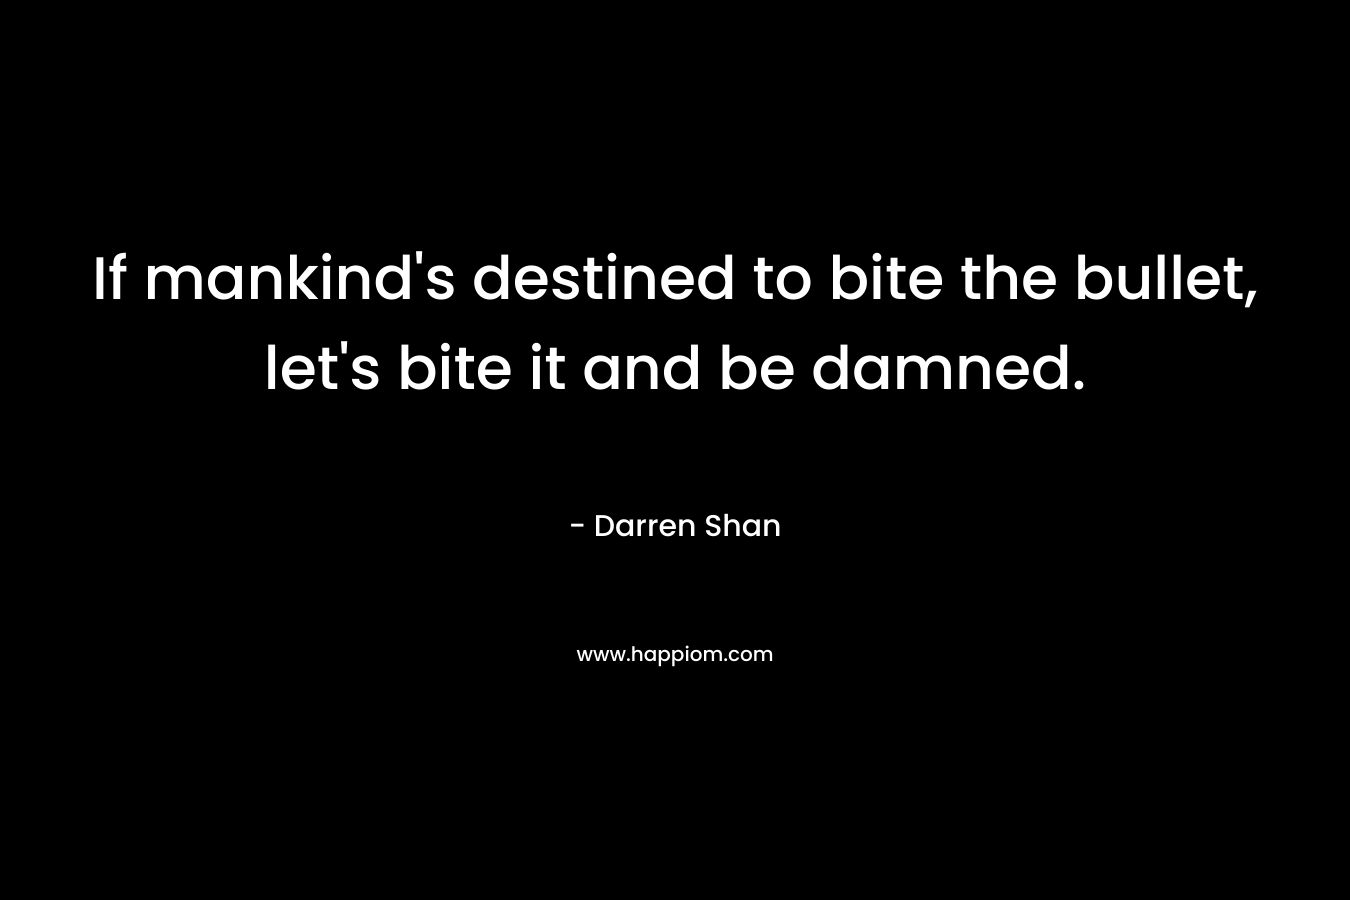 If mankind’s destined to bite the bullet, let’s bite it and be damned. – Darren Shan